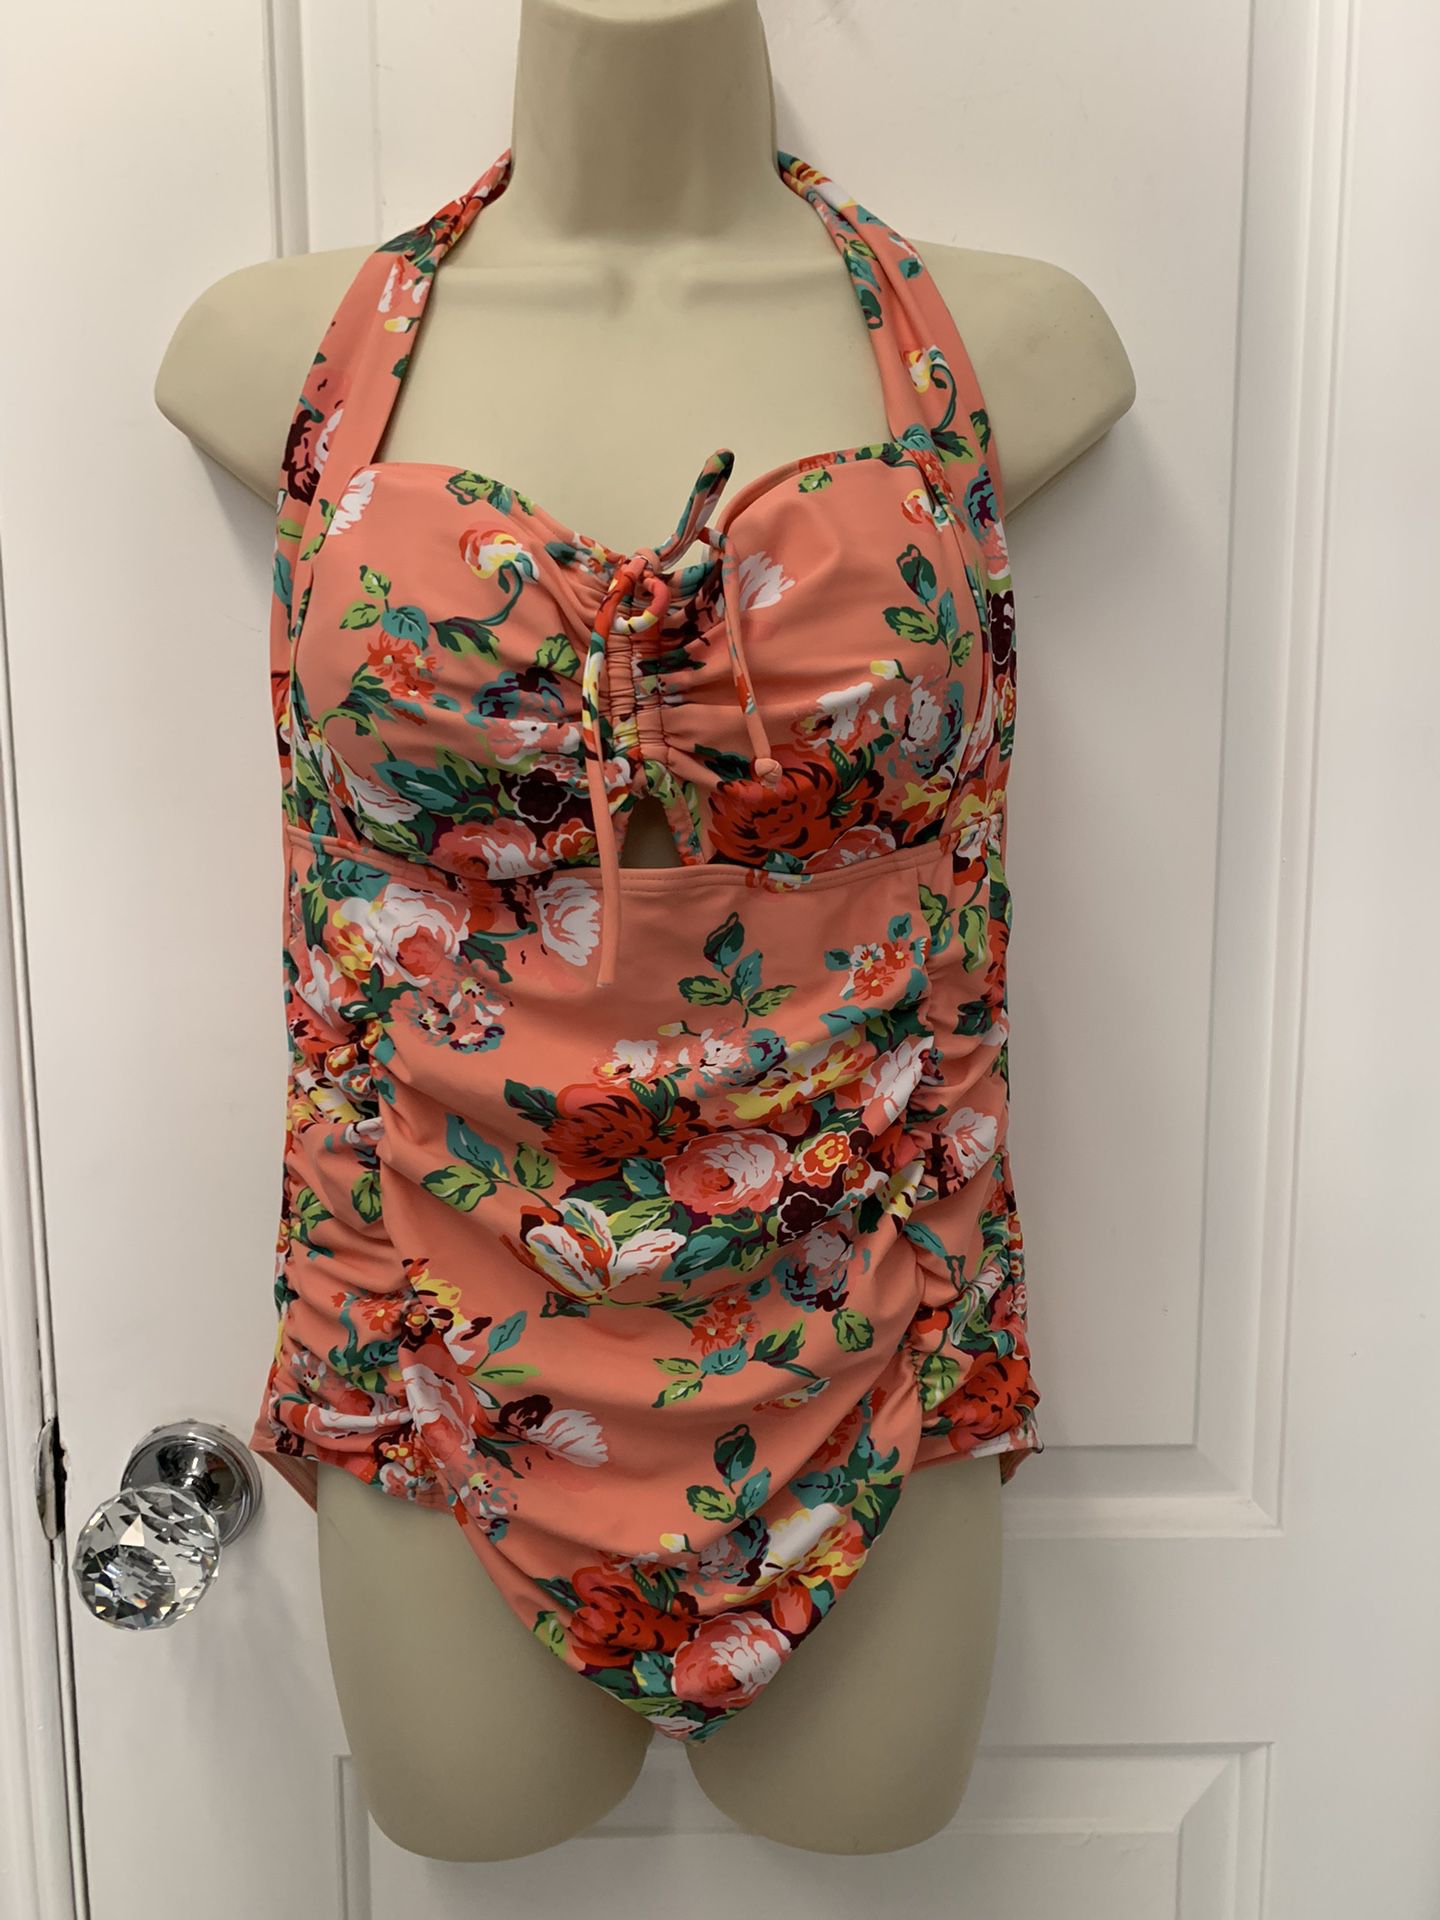 Adult Women Fits XL - 3XL One Piece Bathing Suit 🩱 Floral Padded Wire Halter 